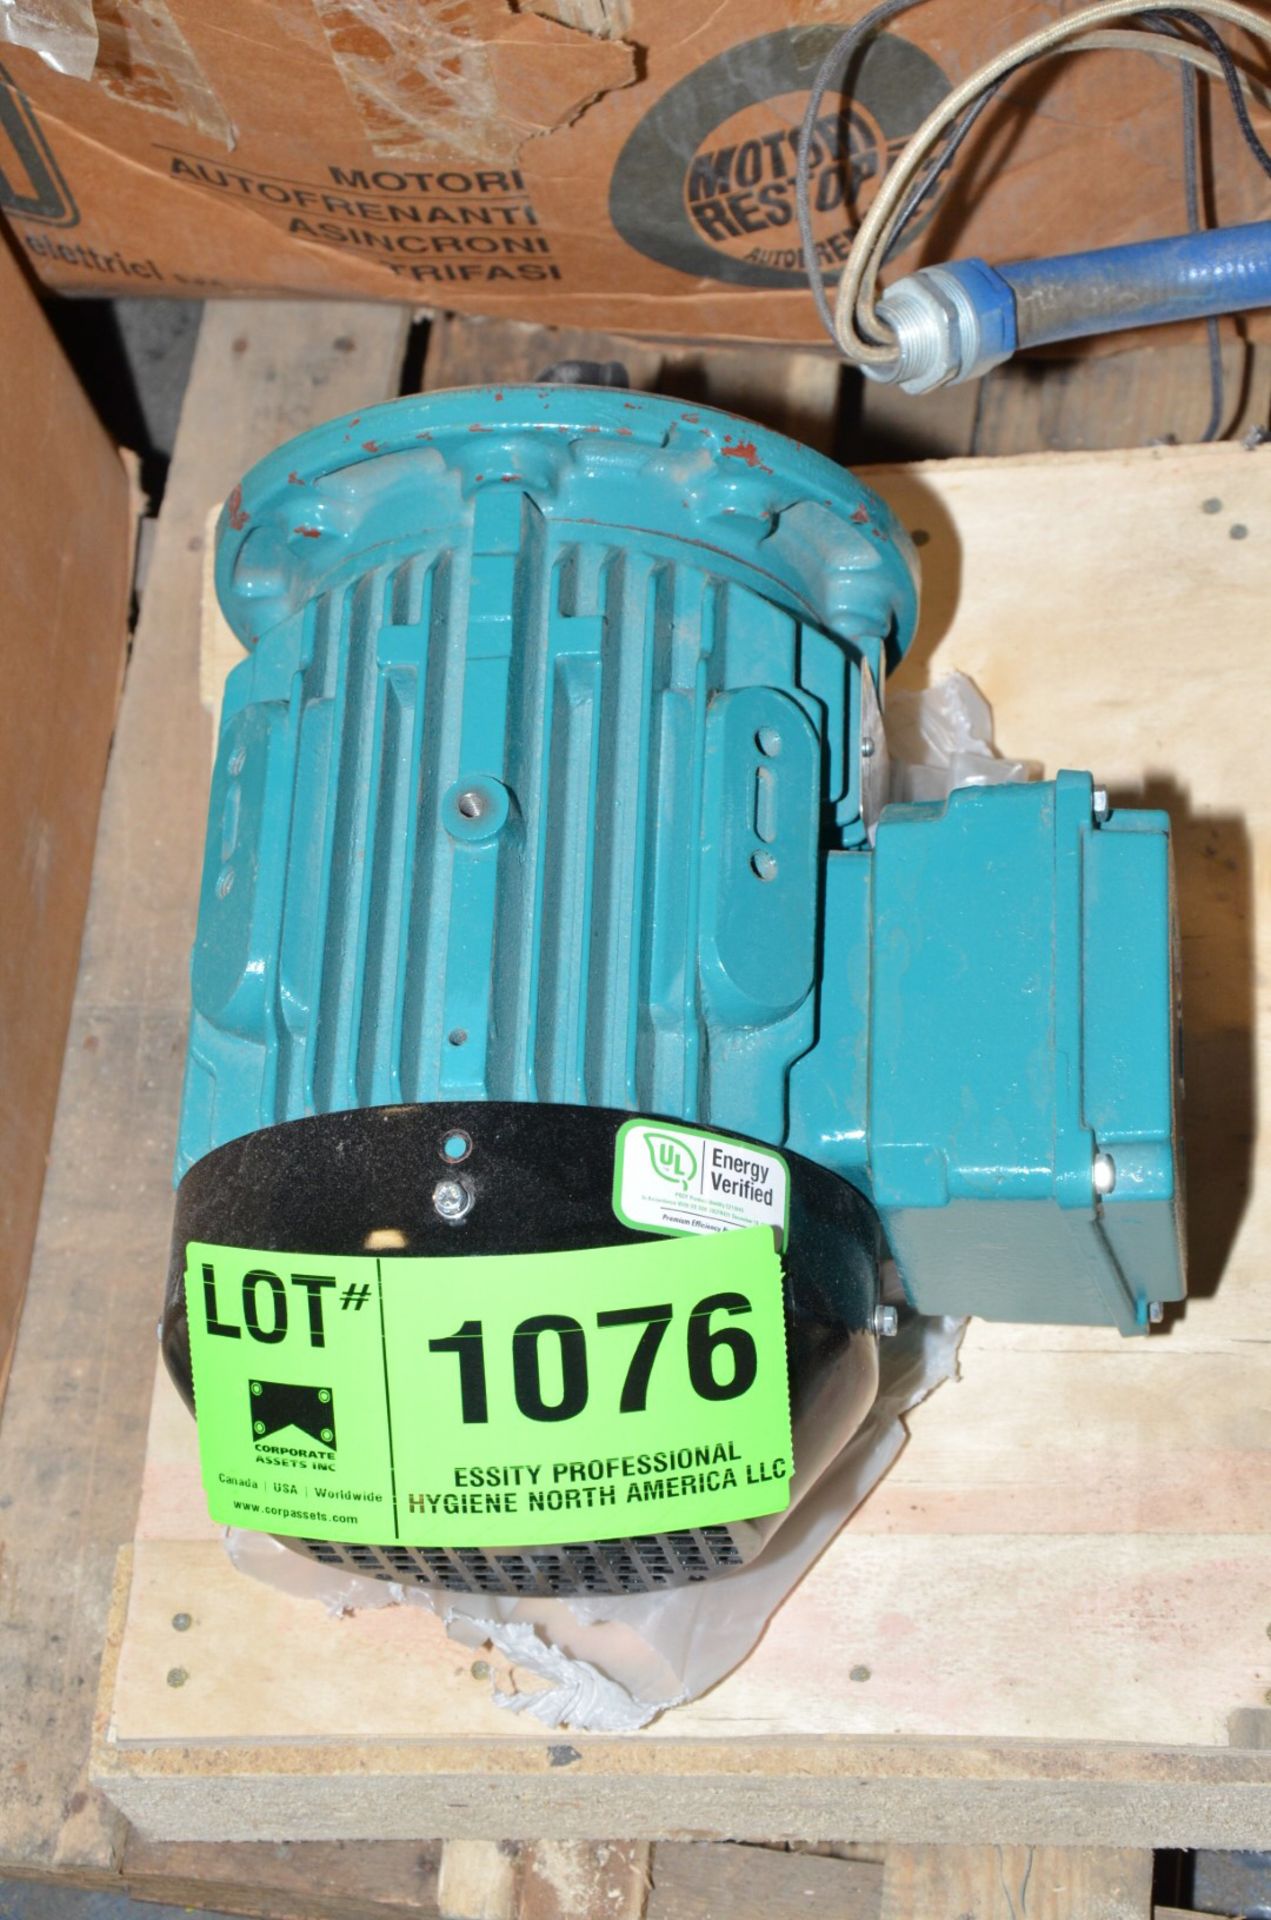 BROOK CROMPTON 3 HP 460V 1760 RPM ELECTRIC MOTOR [RIGGING FEE FOR LOT #1076 - $25 USD PLUS